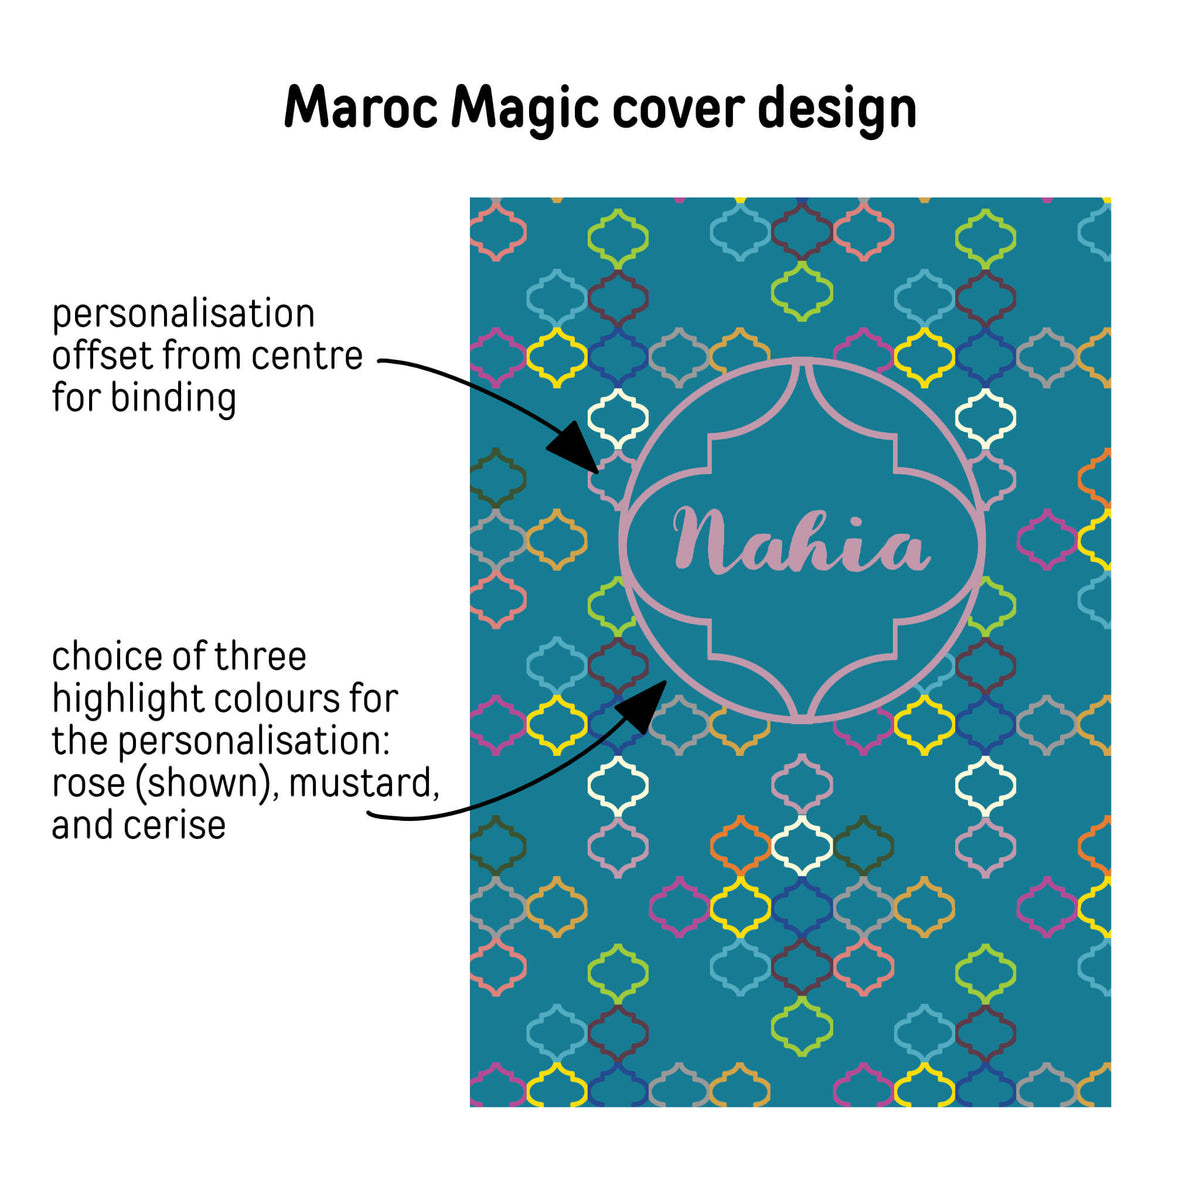 Every Haluna Happy Names notebook cover uses a design that is adapted and optimised for an A5 format including font sizes and element positioning. You choose the highlight colour and the language for the personalisation. Maroc Magic design shown here in teal with colourful line motif reminiscent of Moroccan carpets 